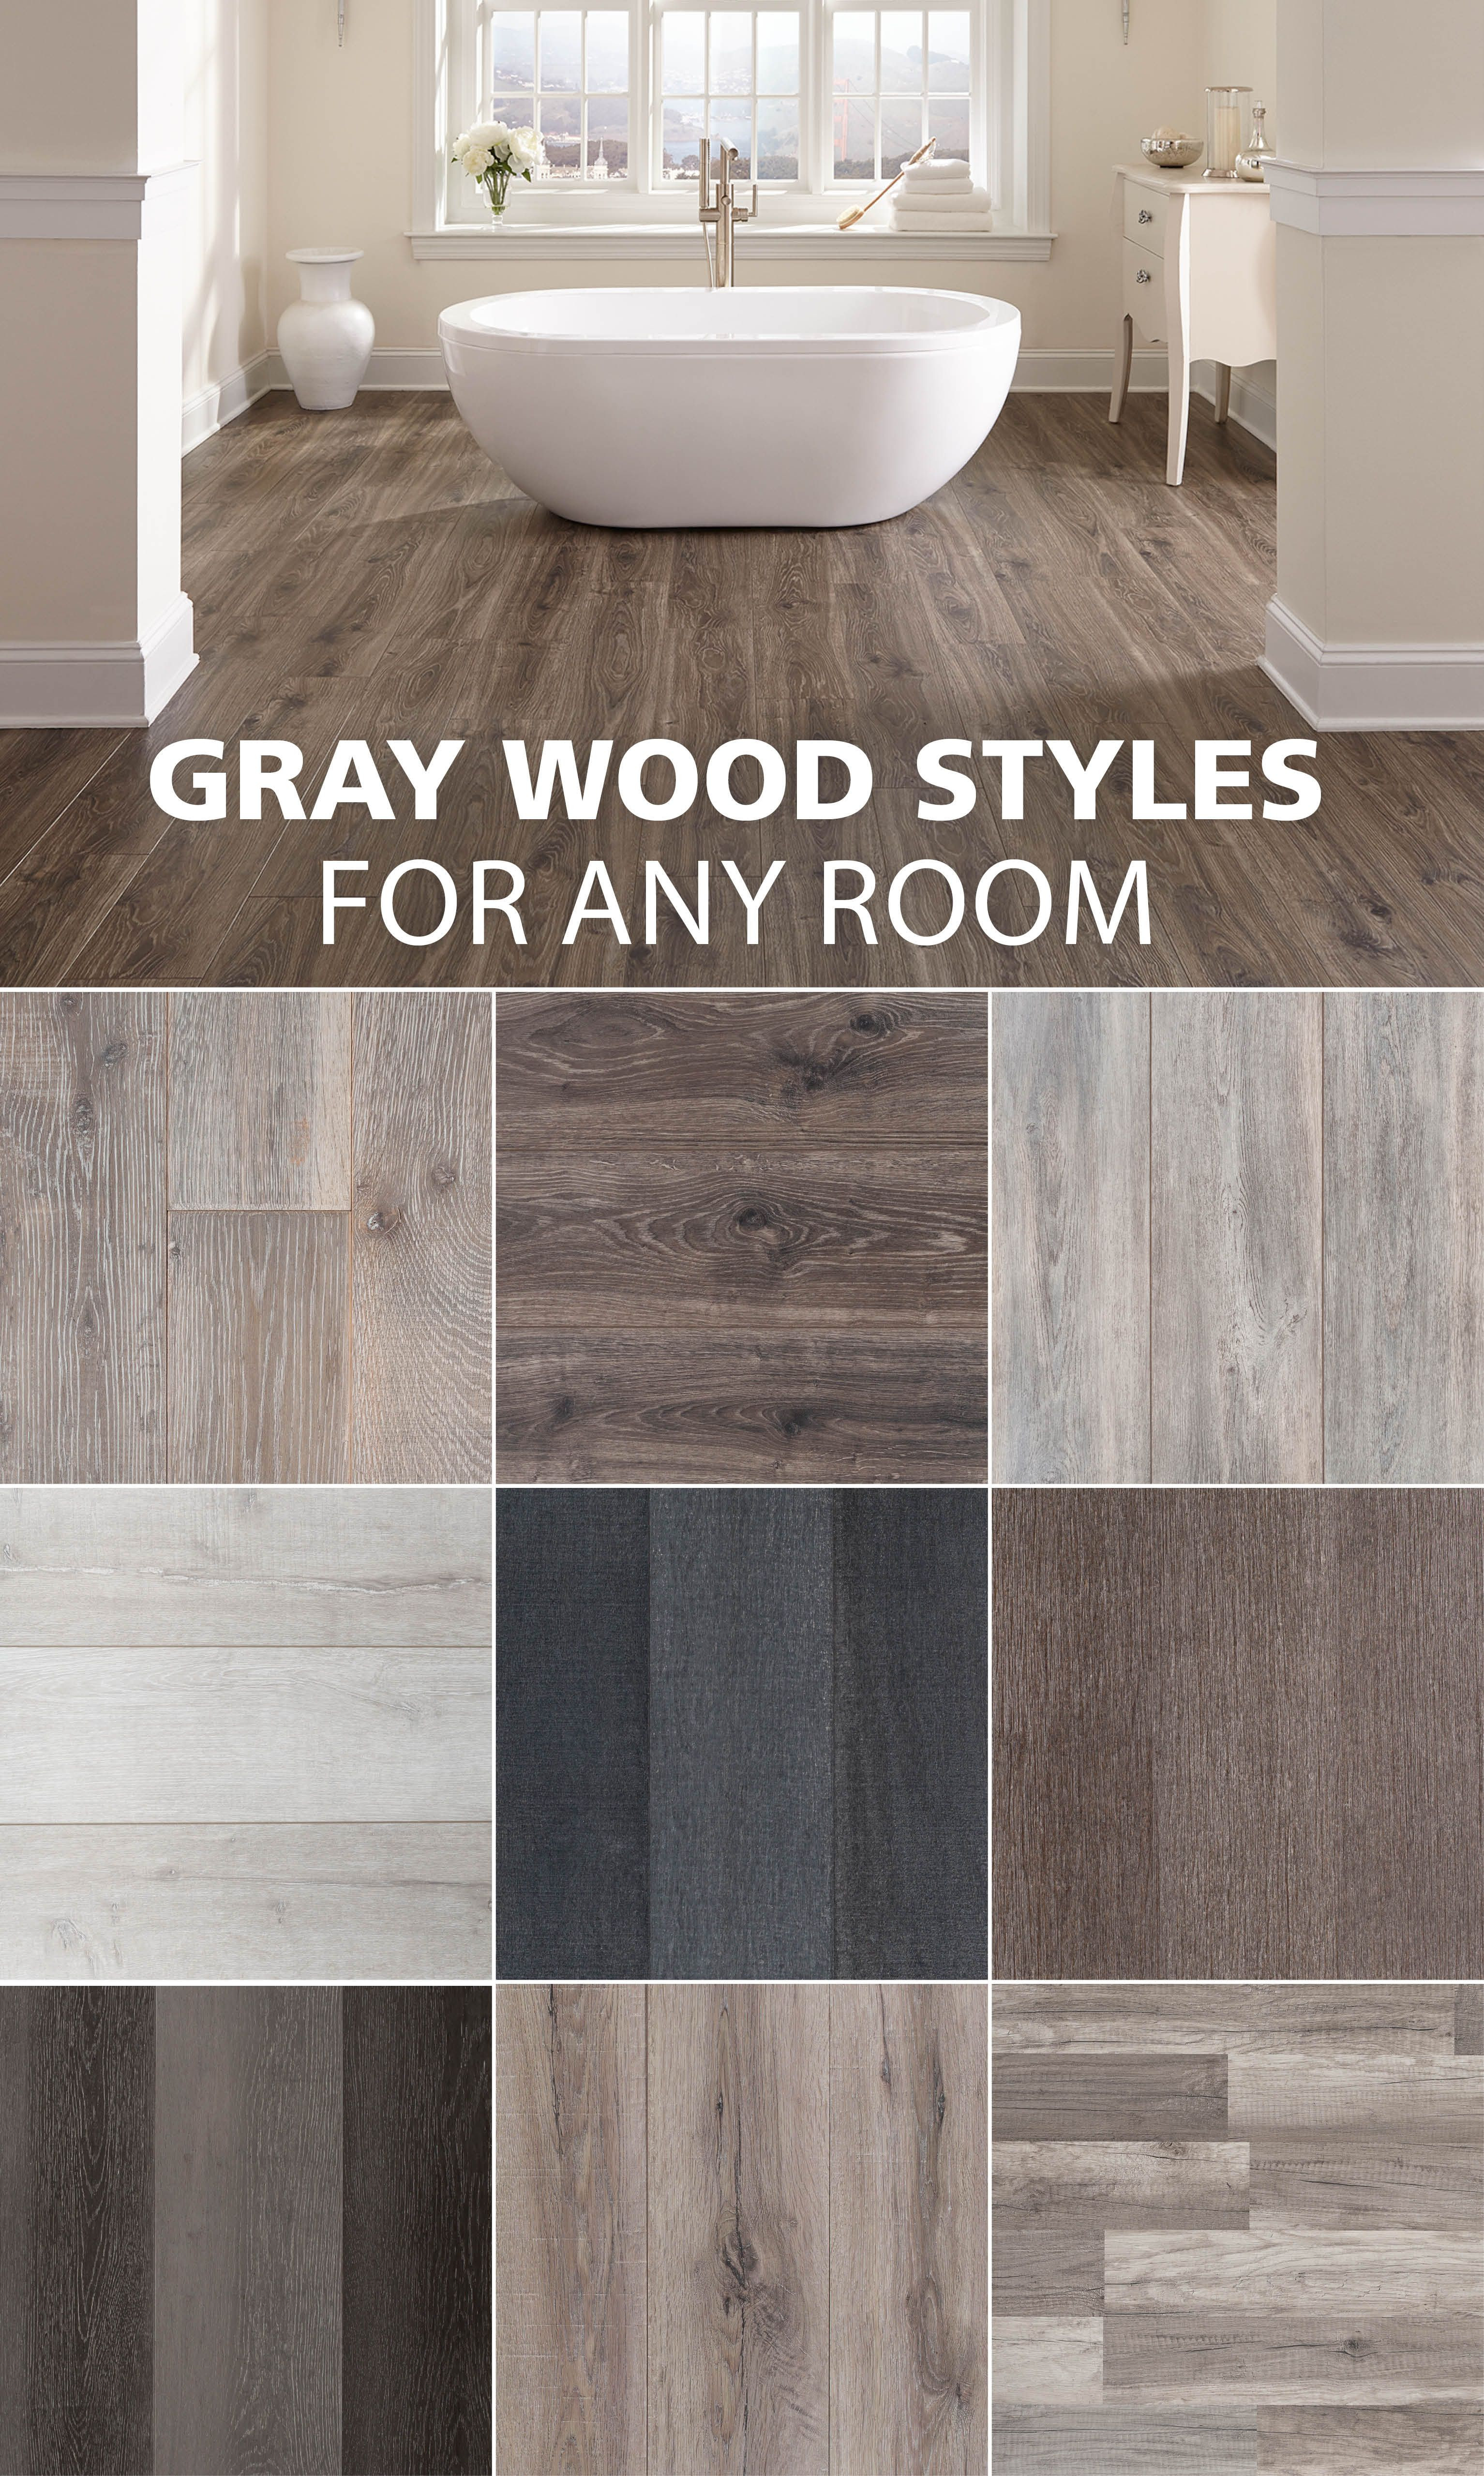 Dark Hardwood Floors Vs Light Hardwood Floors Of Here are some Of Our Favorite Gray Wood Look Styles Home Decor Intended for Here are some Of Our Favorite Gray Wood Look Styles Gray Hardwood Floors Light